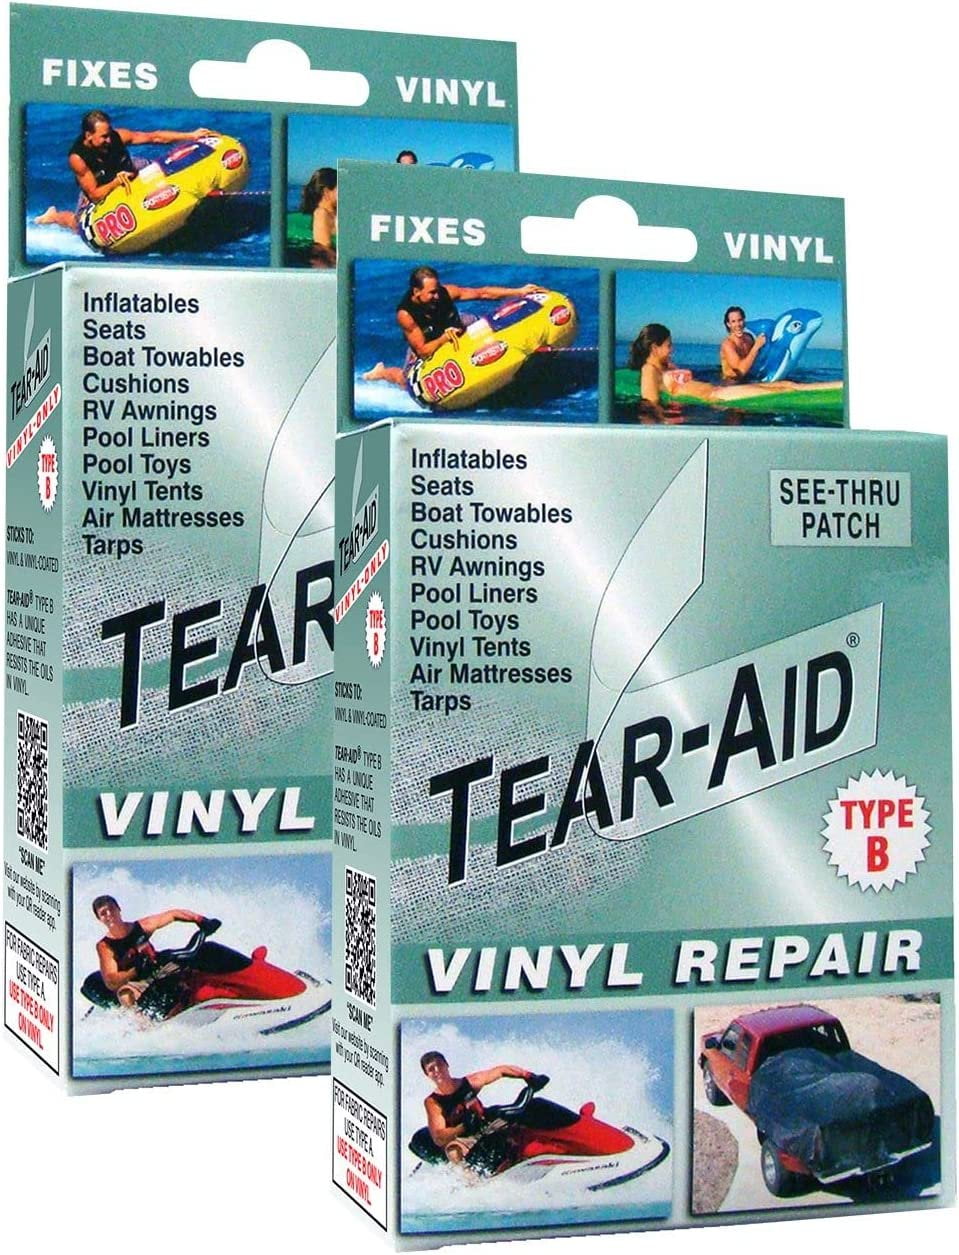 TEAR-AID Inflatable Repair Kit Type B Clear Patch Kit for Vinyl and  Vinyl-Coated Materials Use for Inflatable Bounce House Boat Waterslide Air  Matress More Yellow Box Inflatable Repair (Pack of 1)